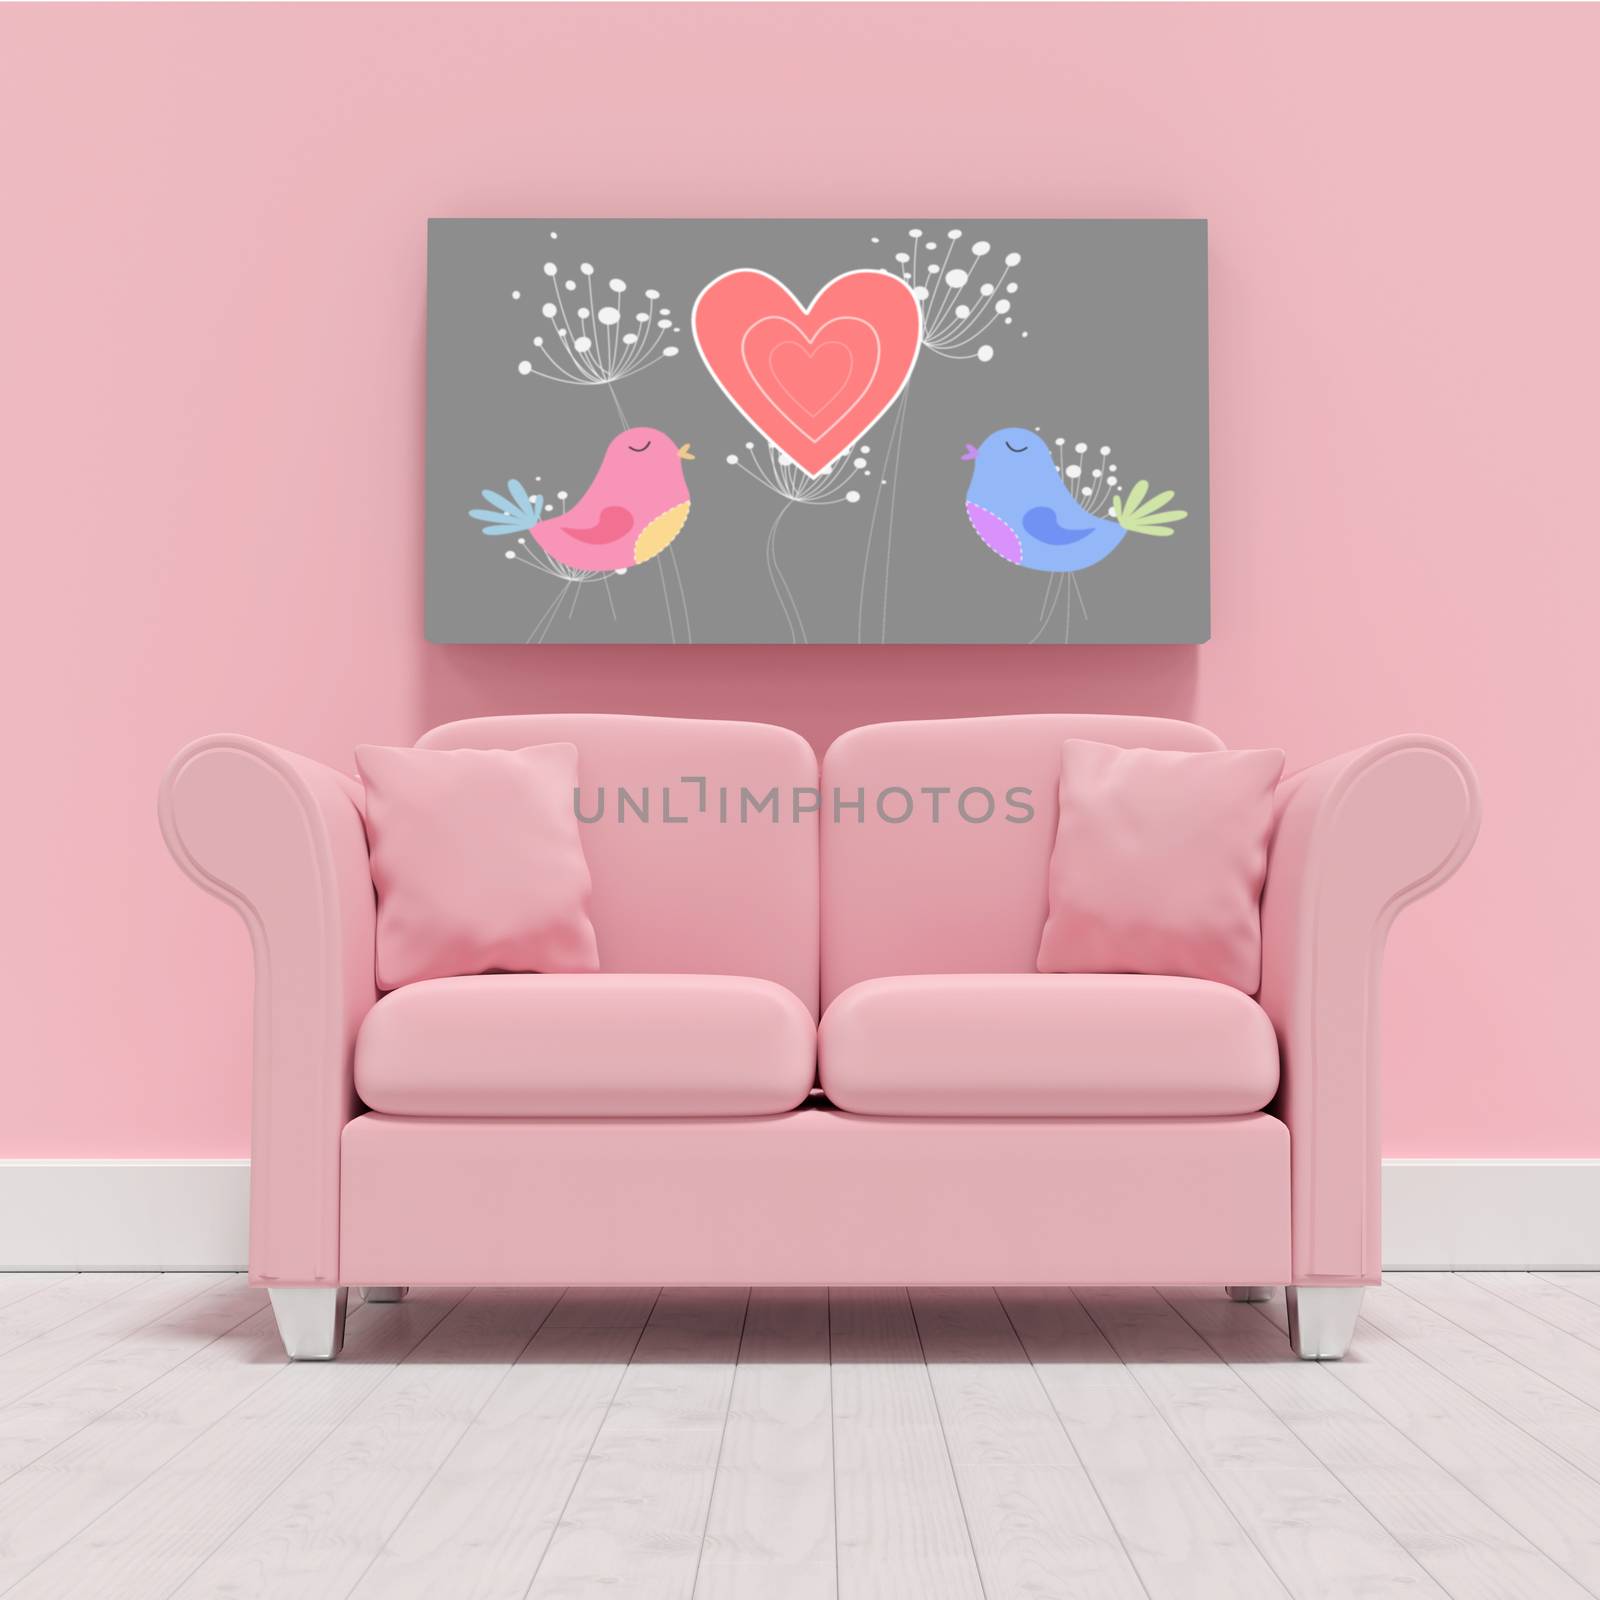 Pink couch against blank picture frame  against love birds with heart and dandelions